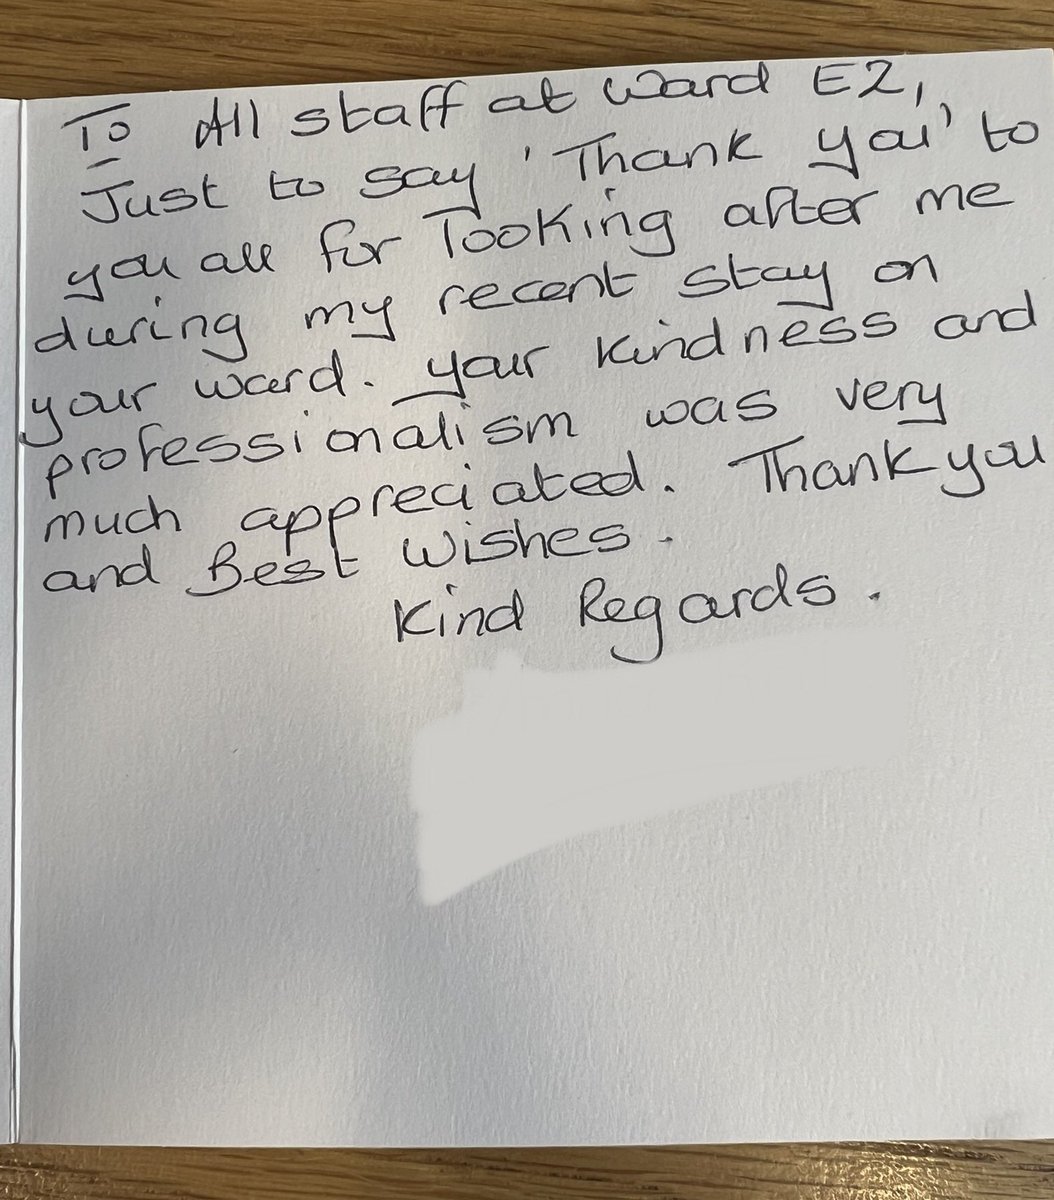 A kind thank you card received from one of our patients today ☺️💙